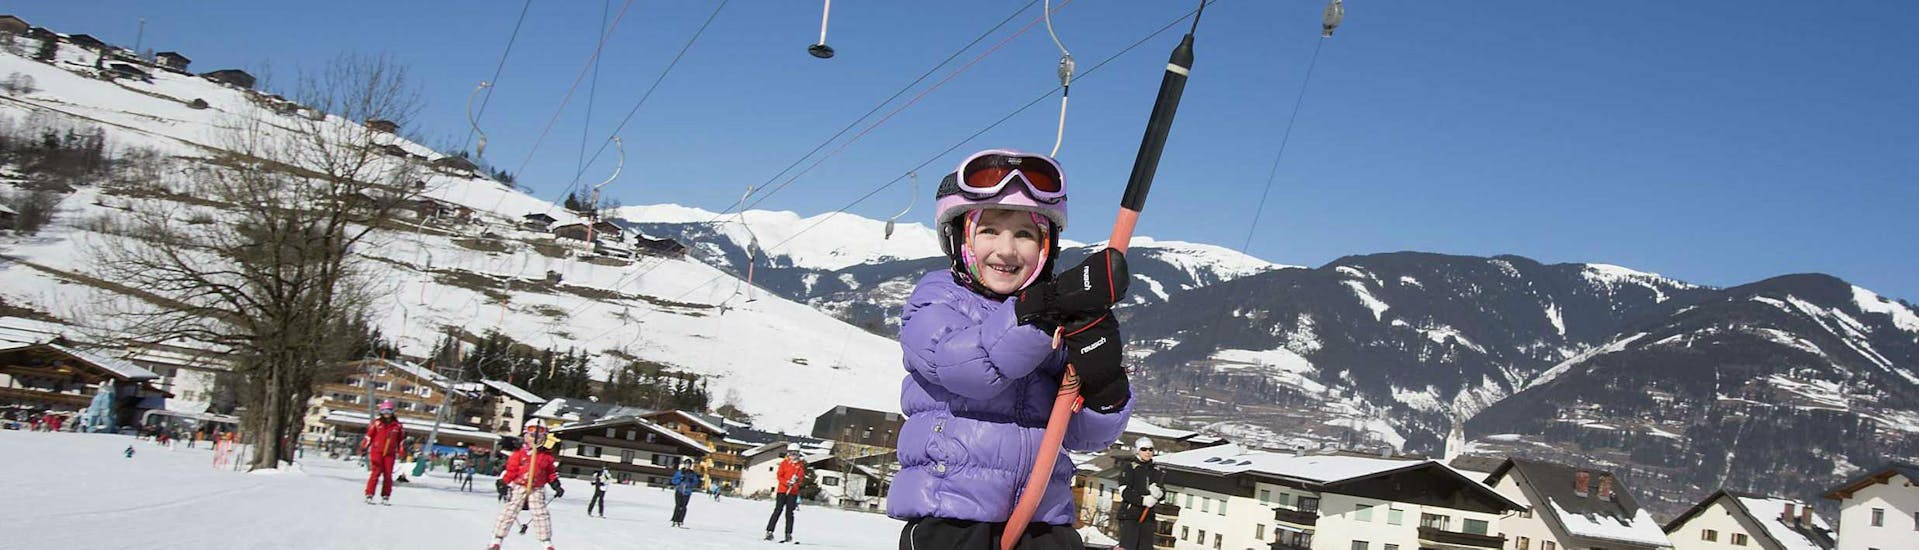 Private Ski Lessons for Teens of All Levels.